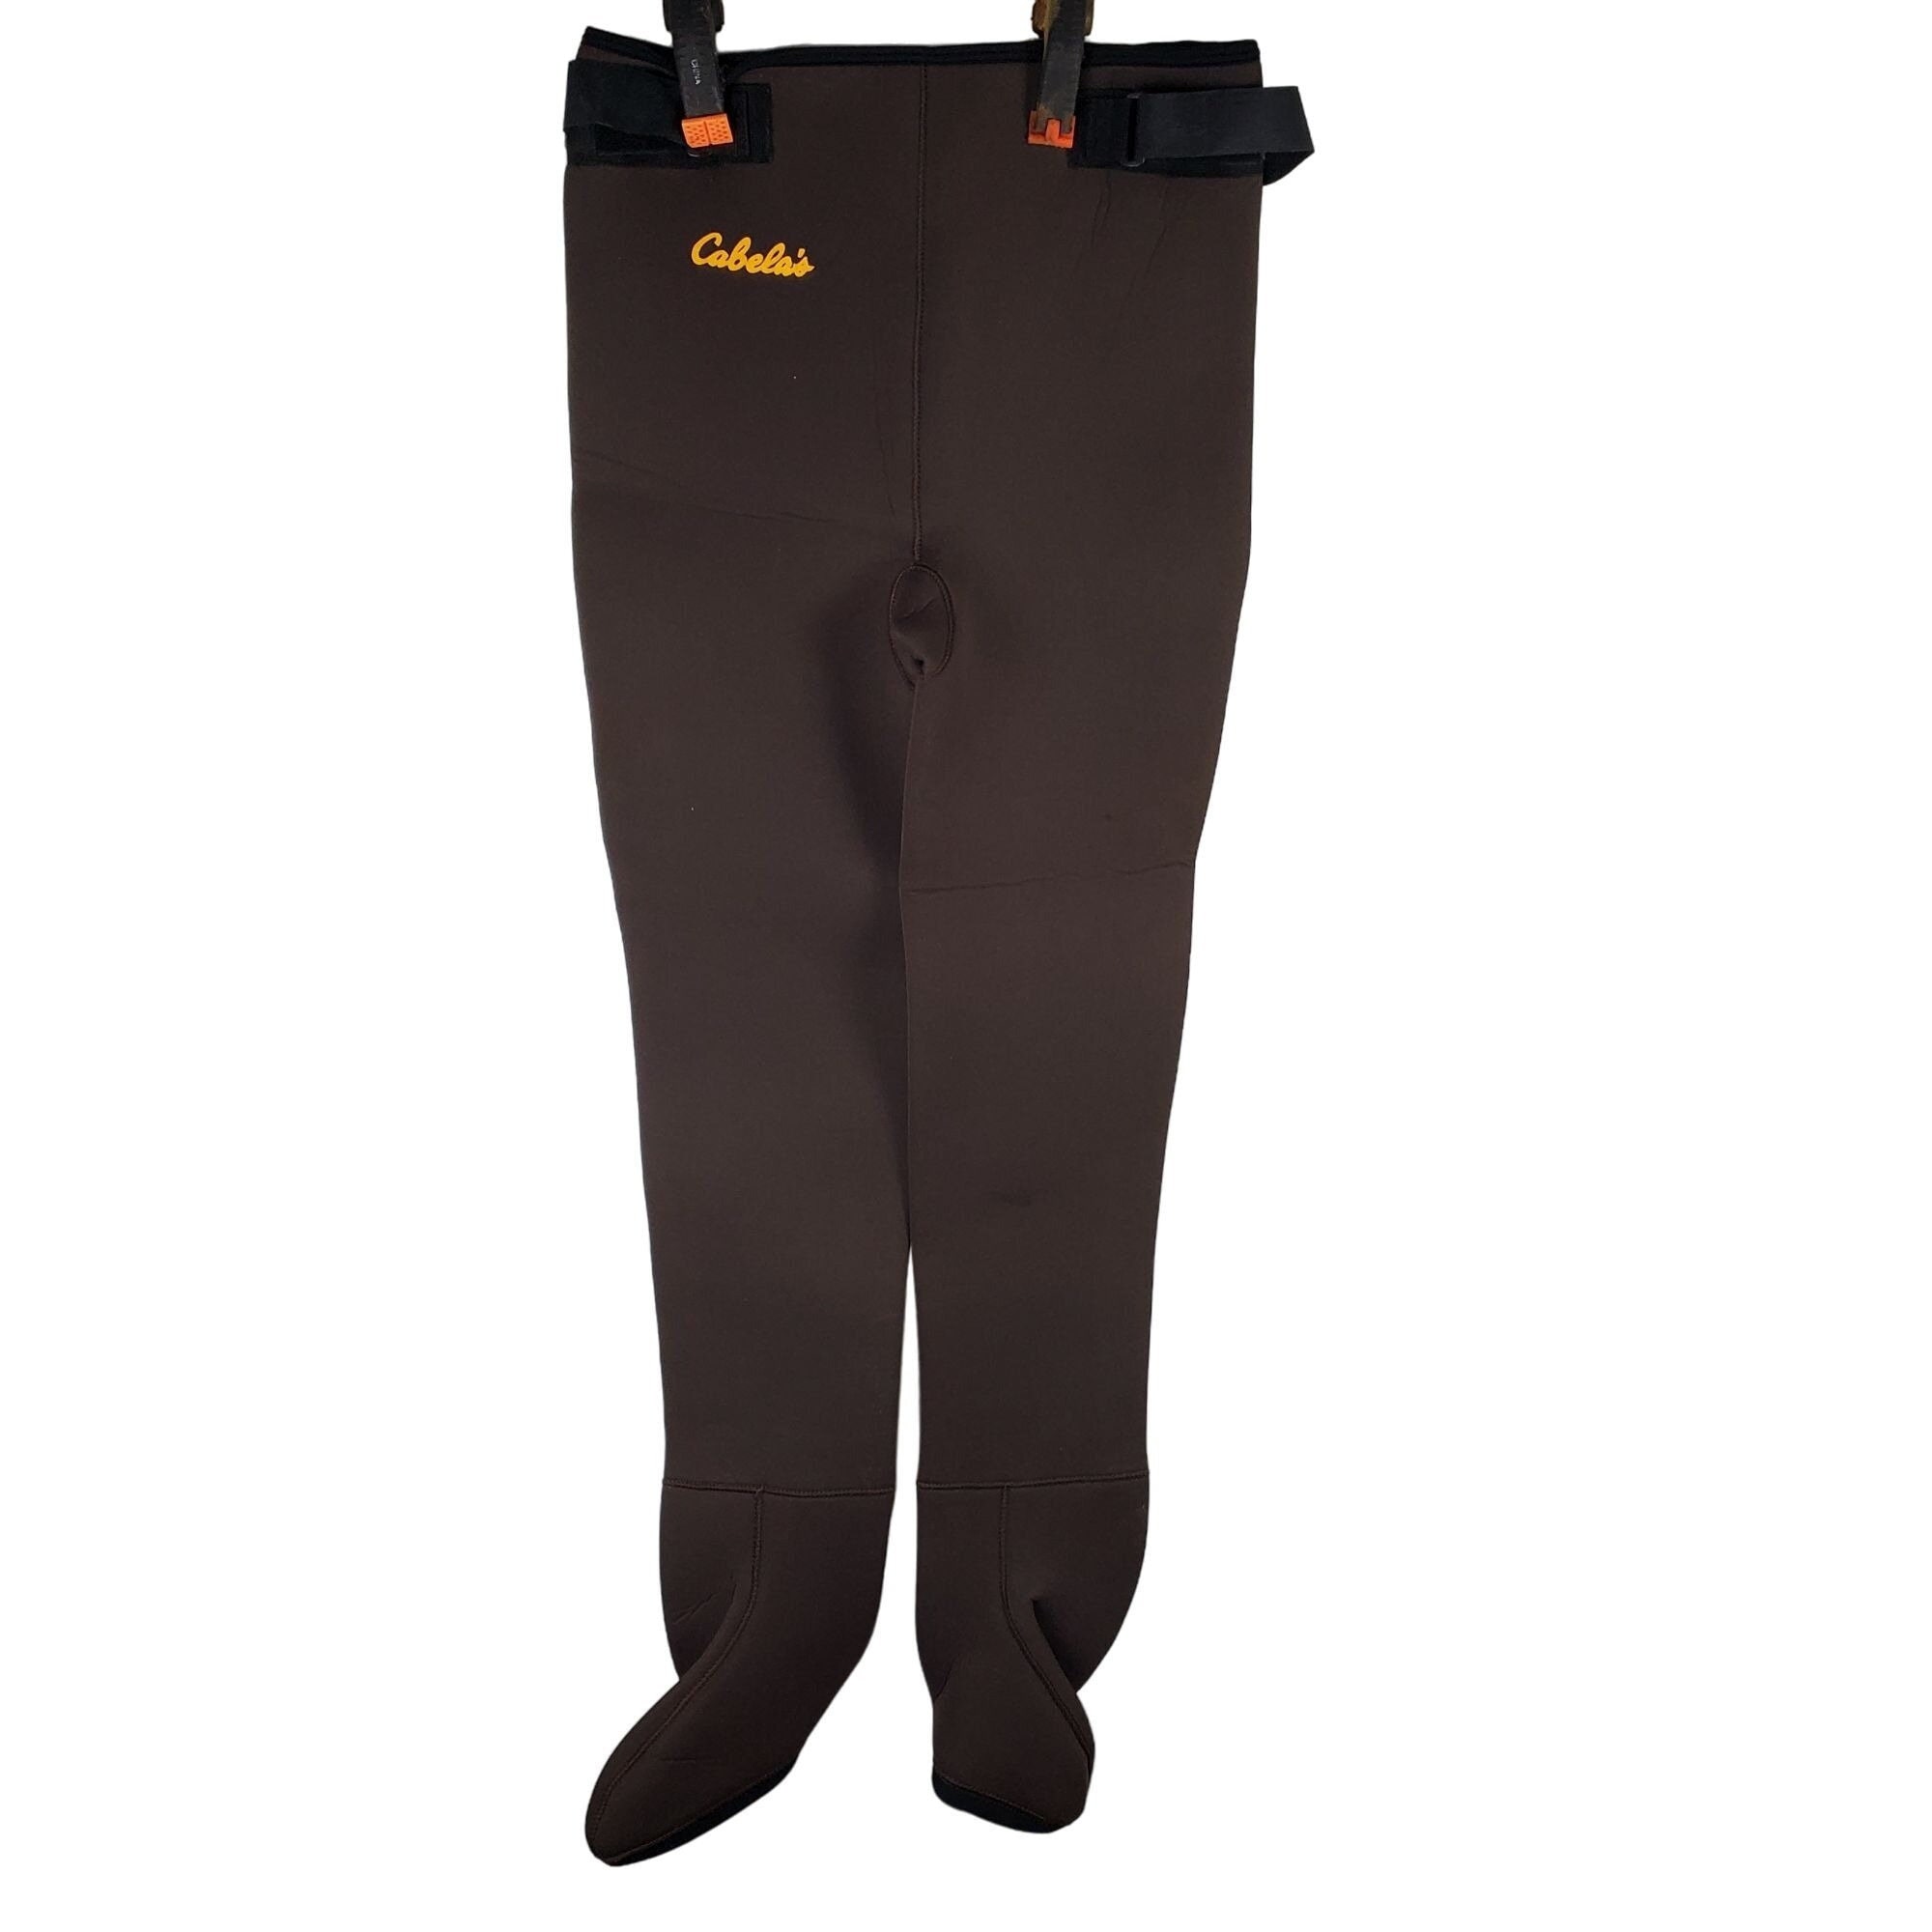 Cabelas Neoprene Pant Waders Size Medium Long Brown Excellent Cond